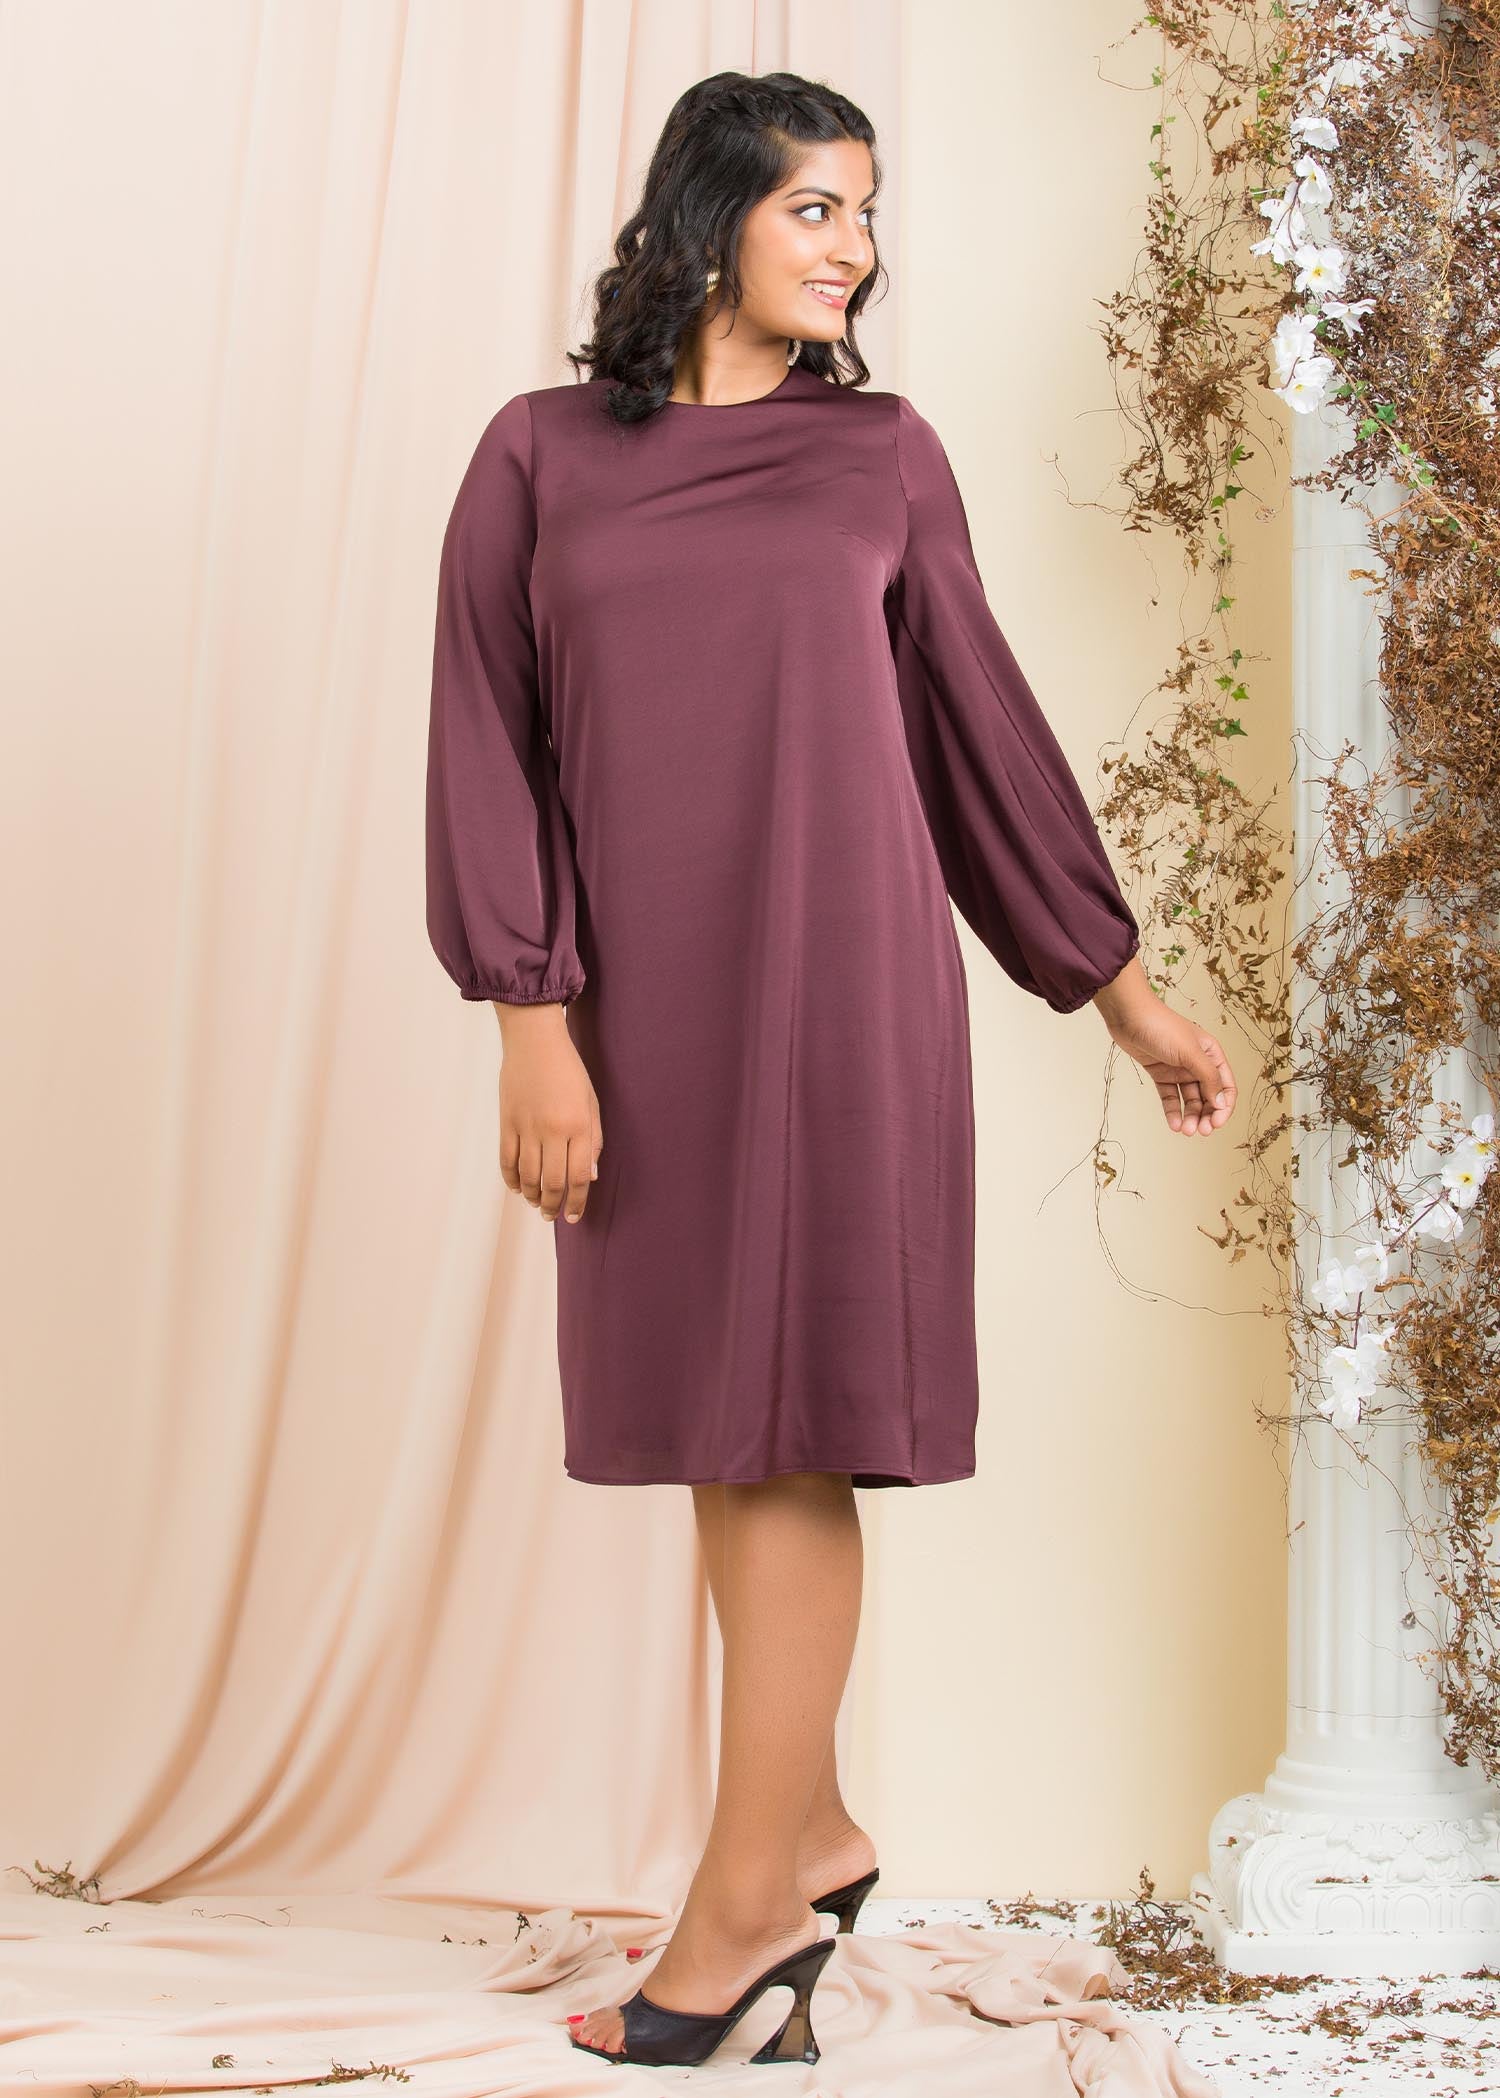 Basic shift dress with long sleeves